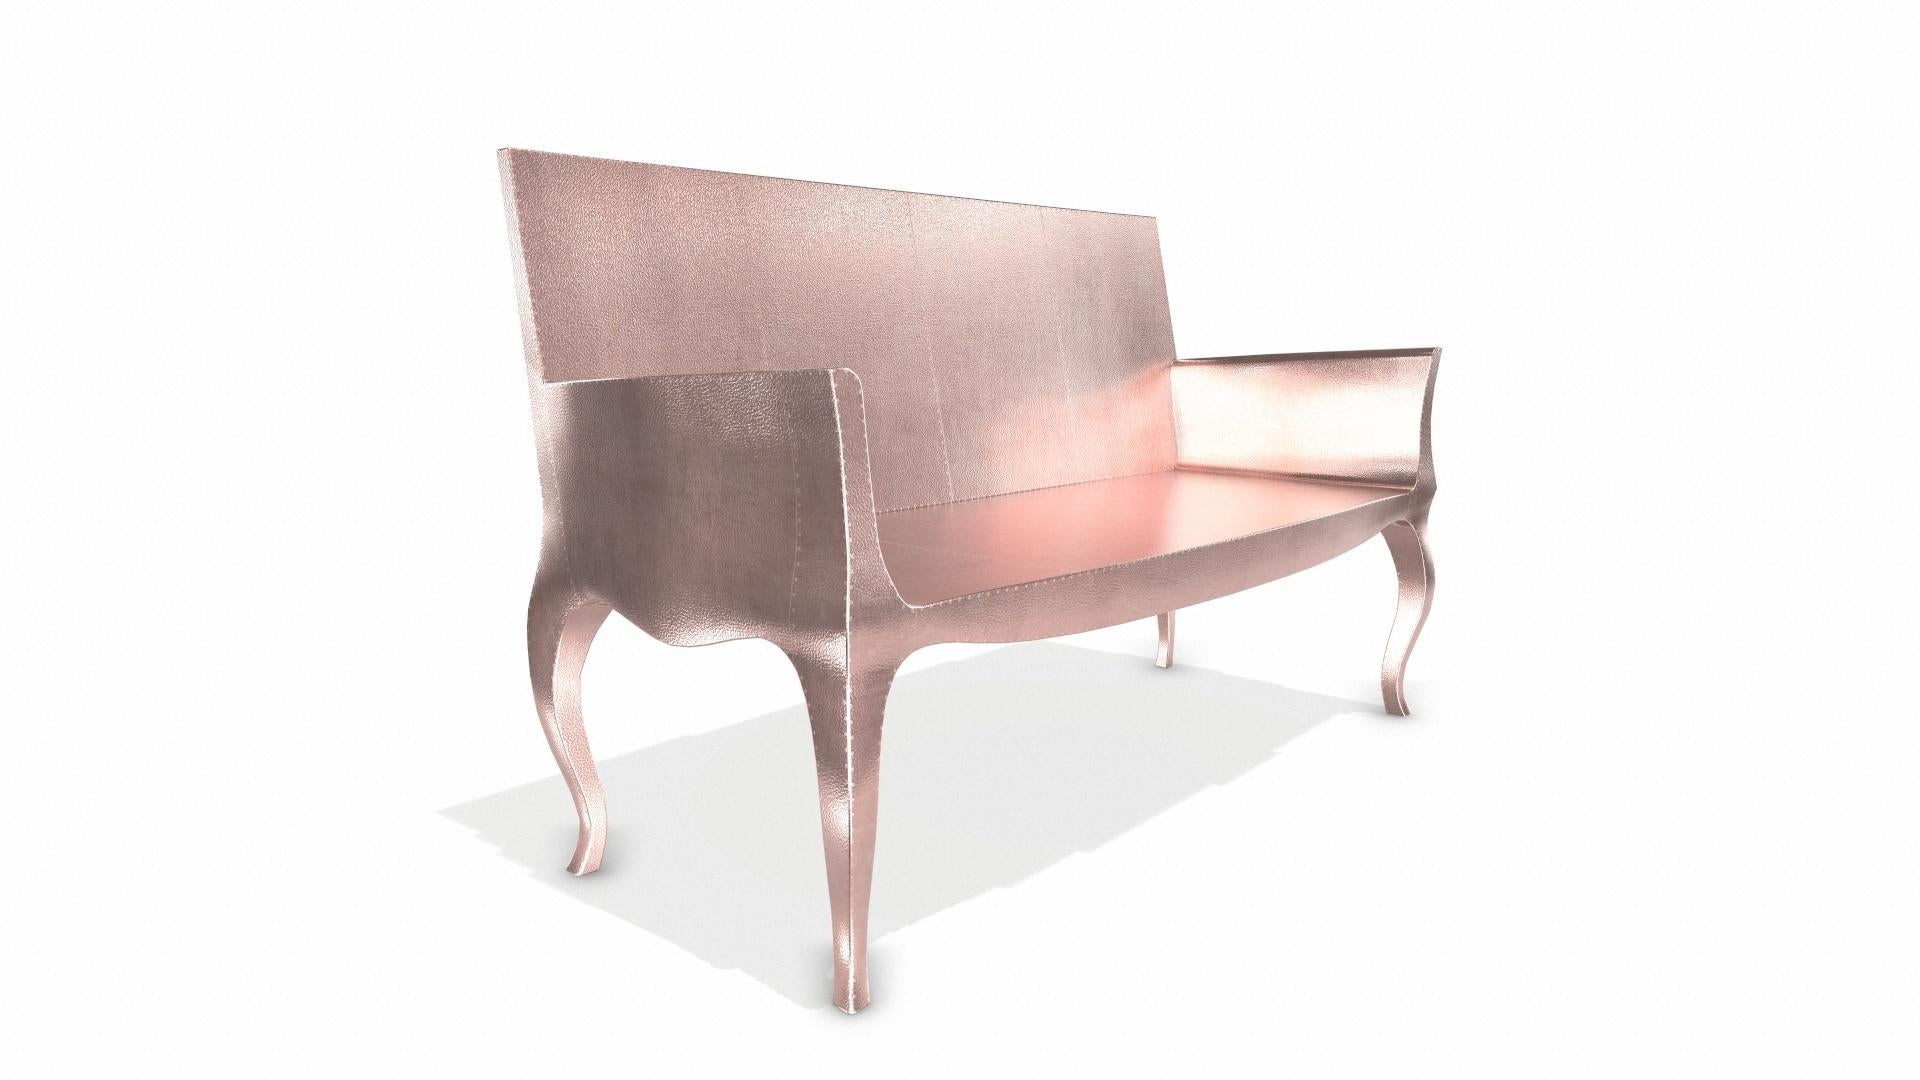 Louise Settee Art Deco Chaise Longues in Fine Hammered Copper by Paul Mathieu In New Condition For Sale In New York, NY